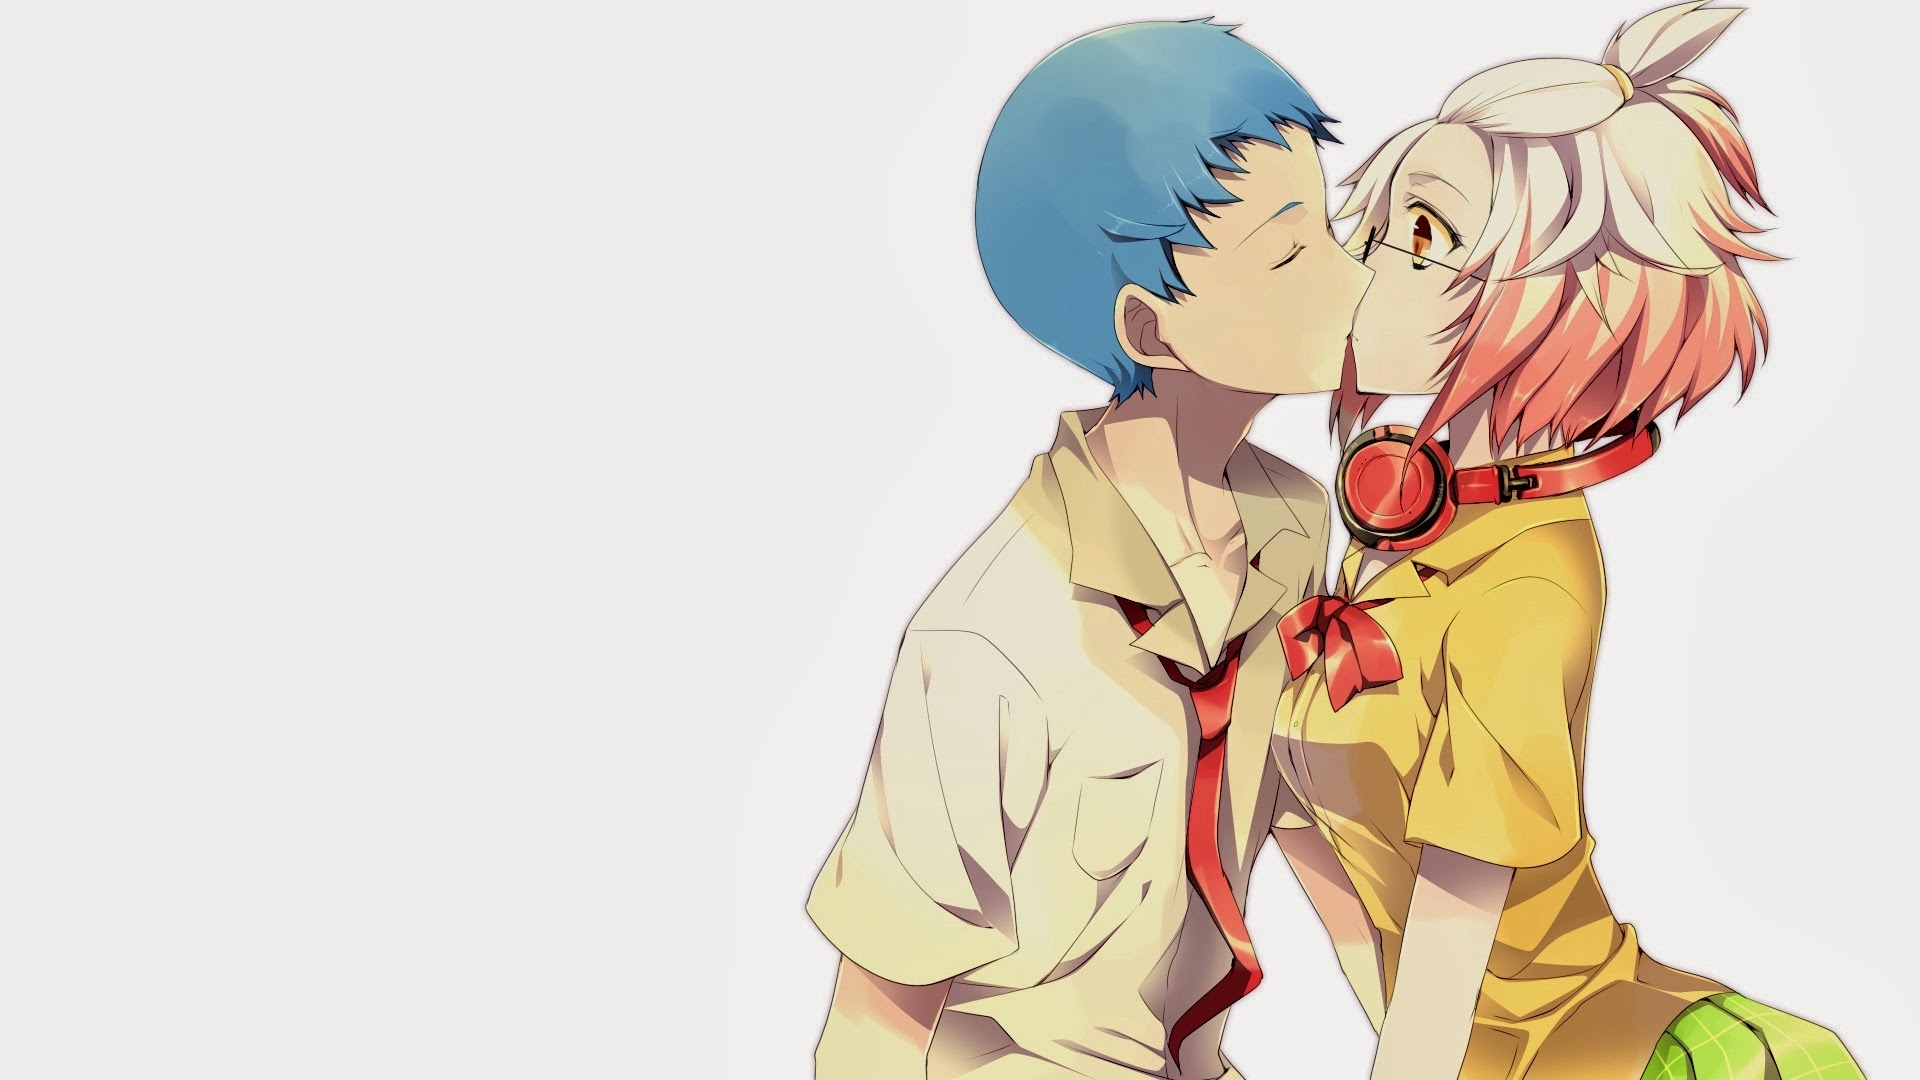 Free download sweet kiss anime couple hd wallpaper b x for your desktop mobile tablet explore sweet couple anime wallpaper sweet wallpapers sweet backgrounds cute anime couple wallpaper